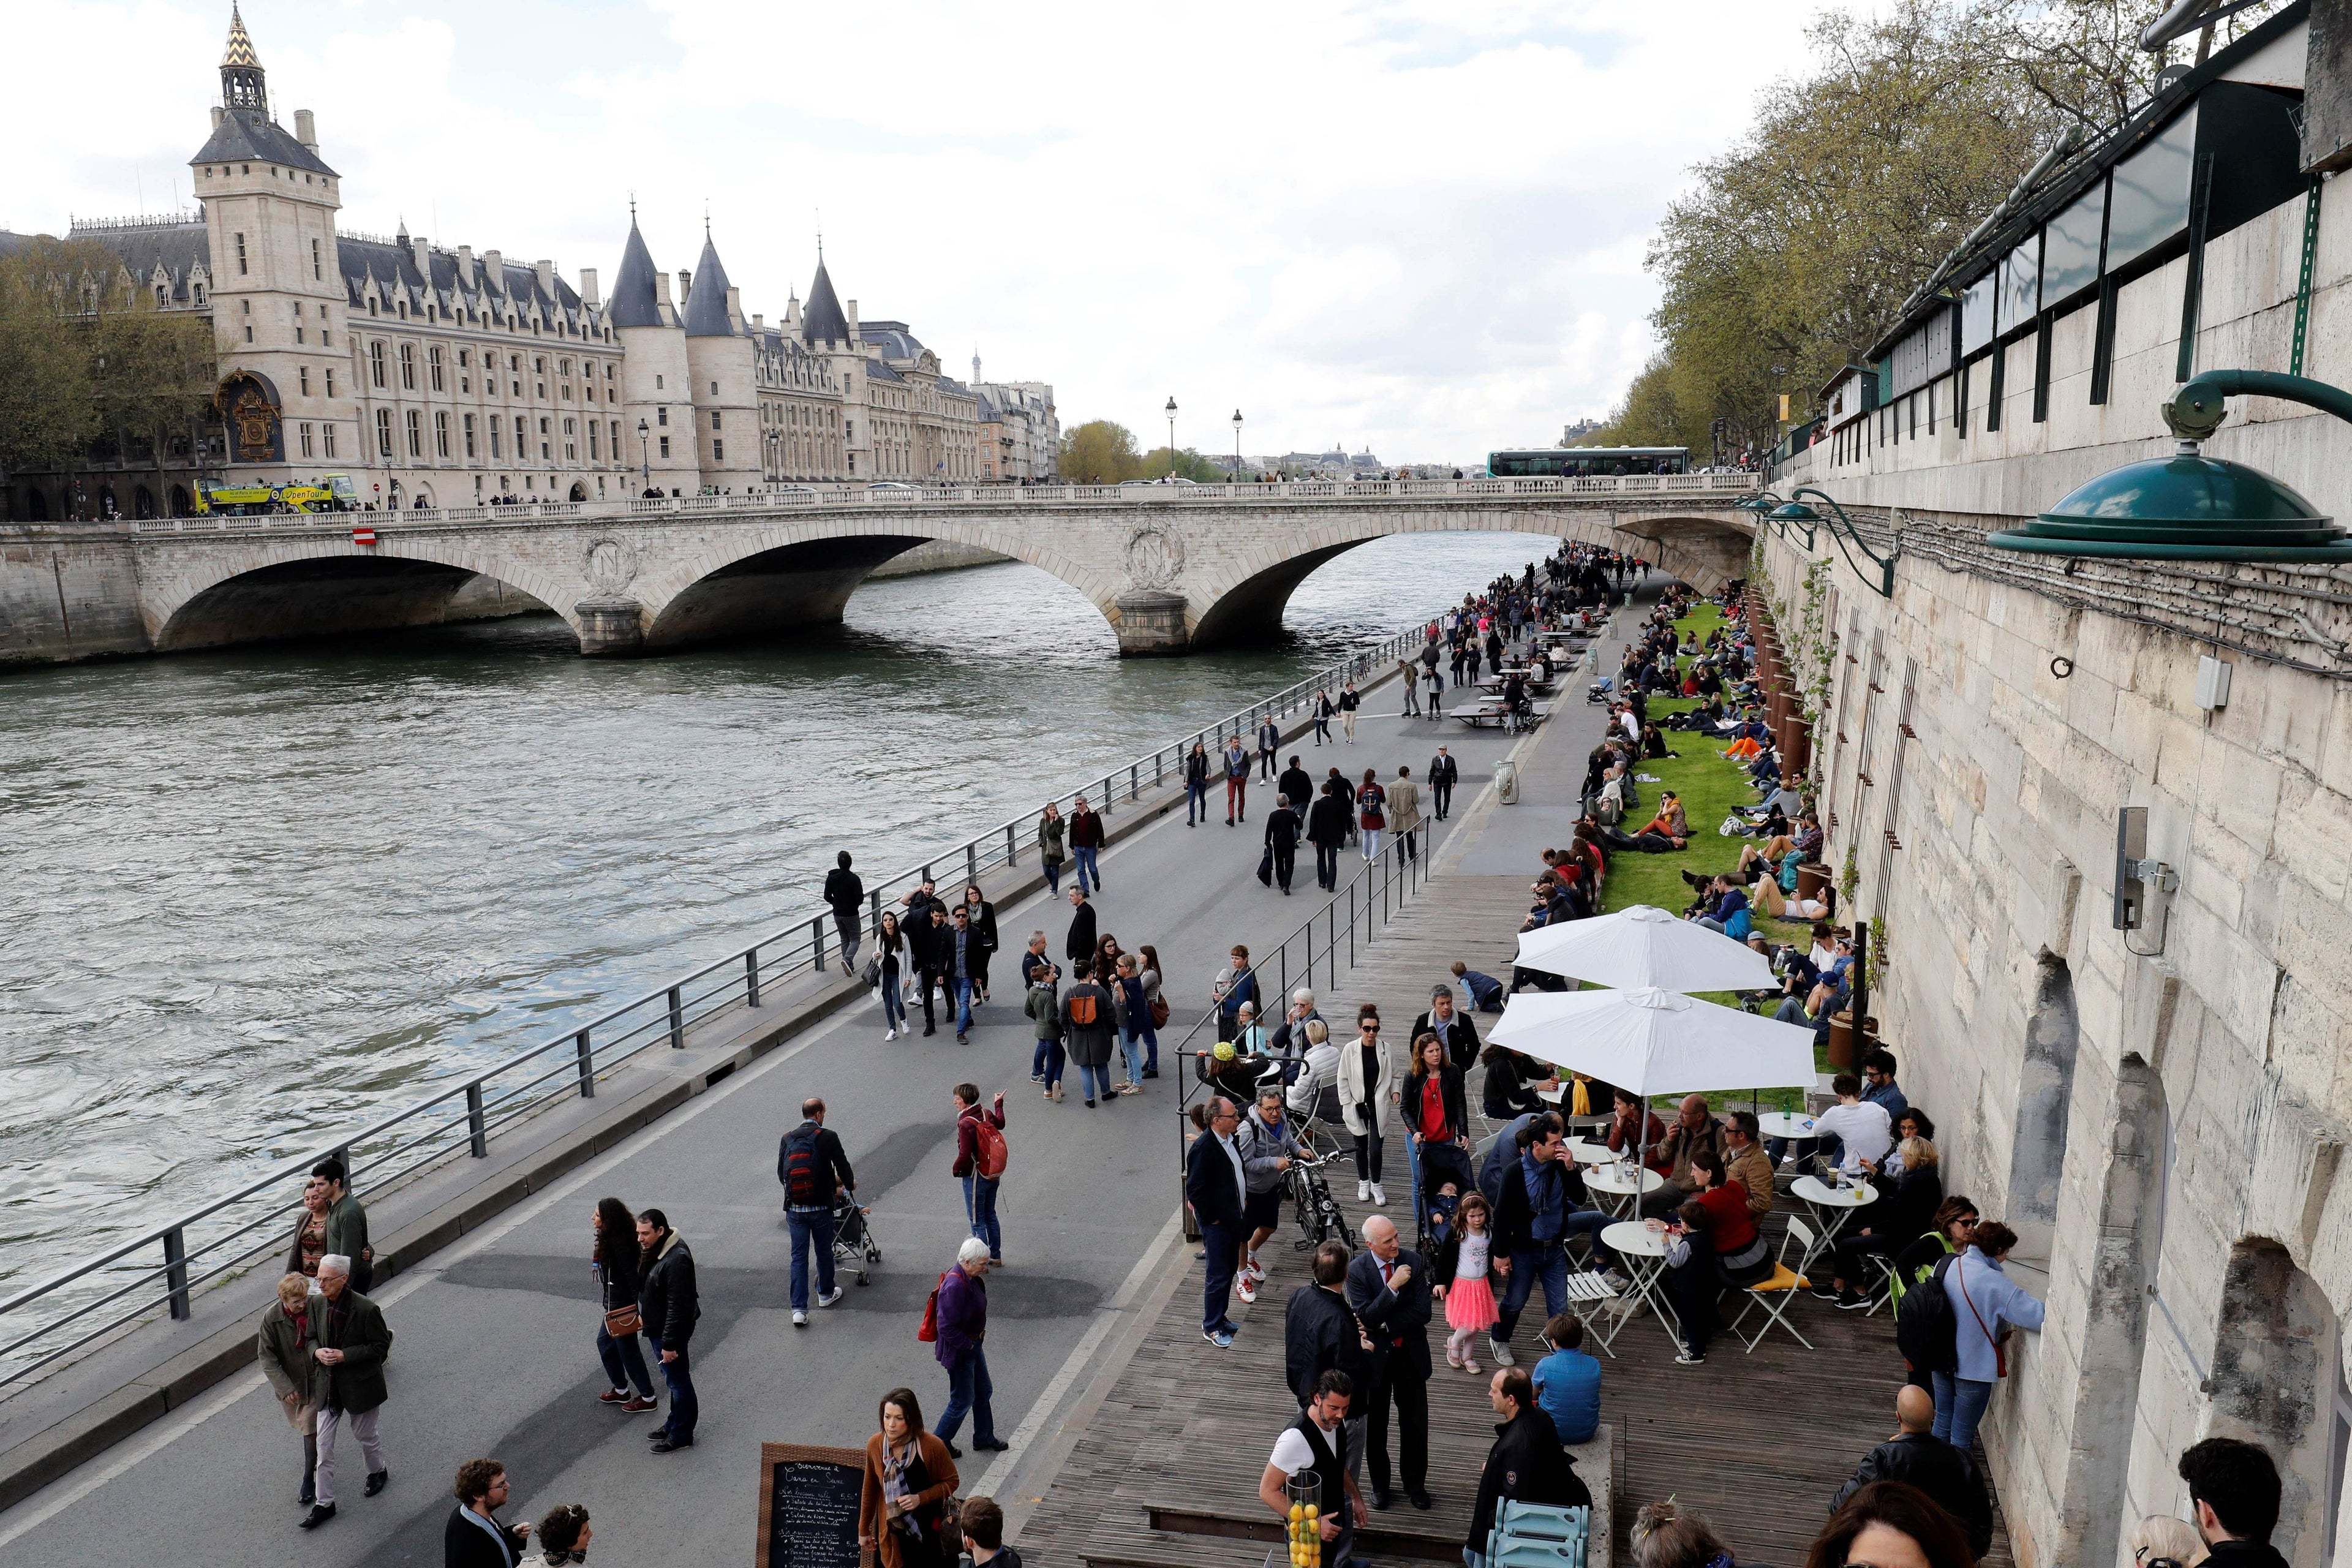 Featured image of the Seine Riverbank courtesy of Francois Guillot via Getty Images.